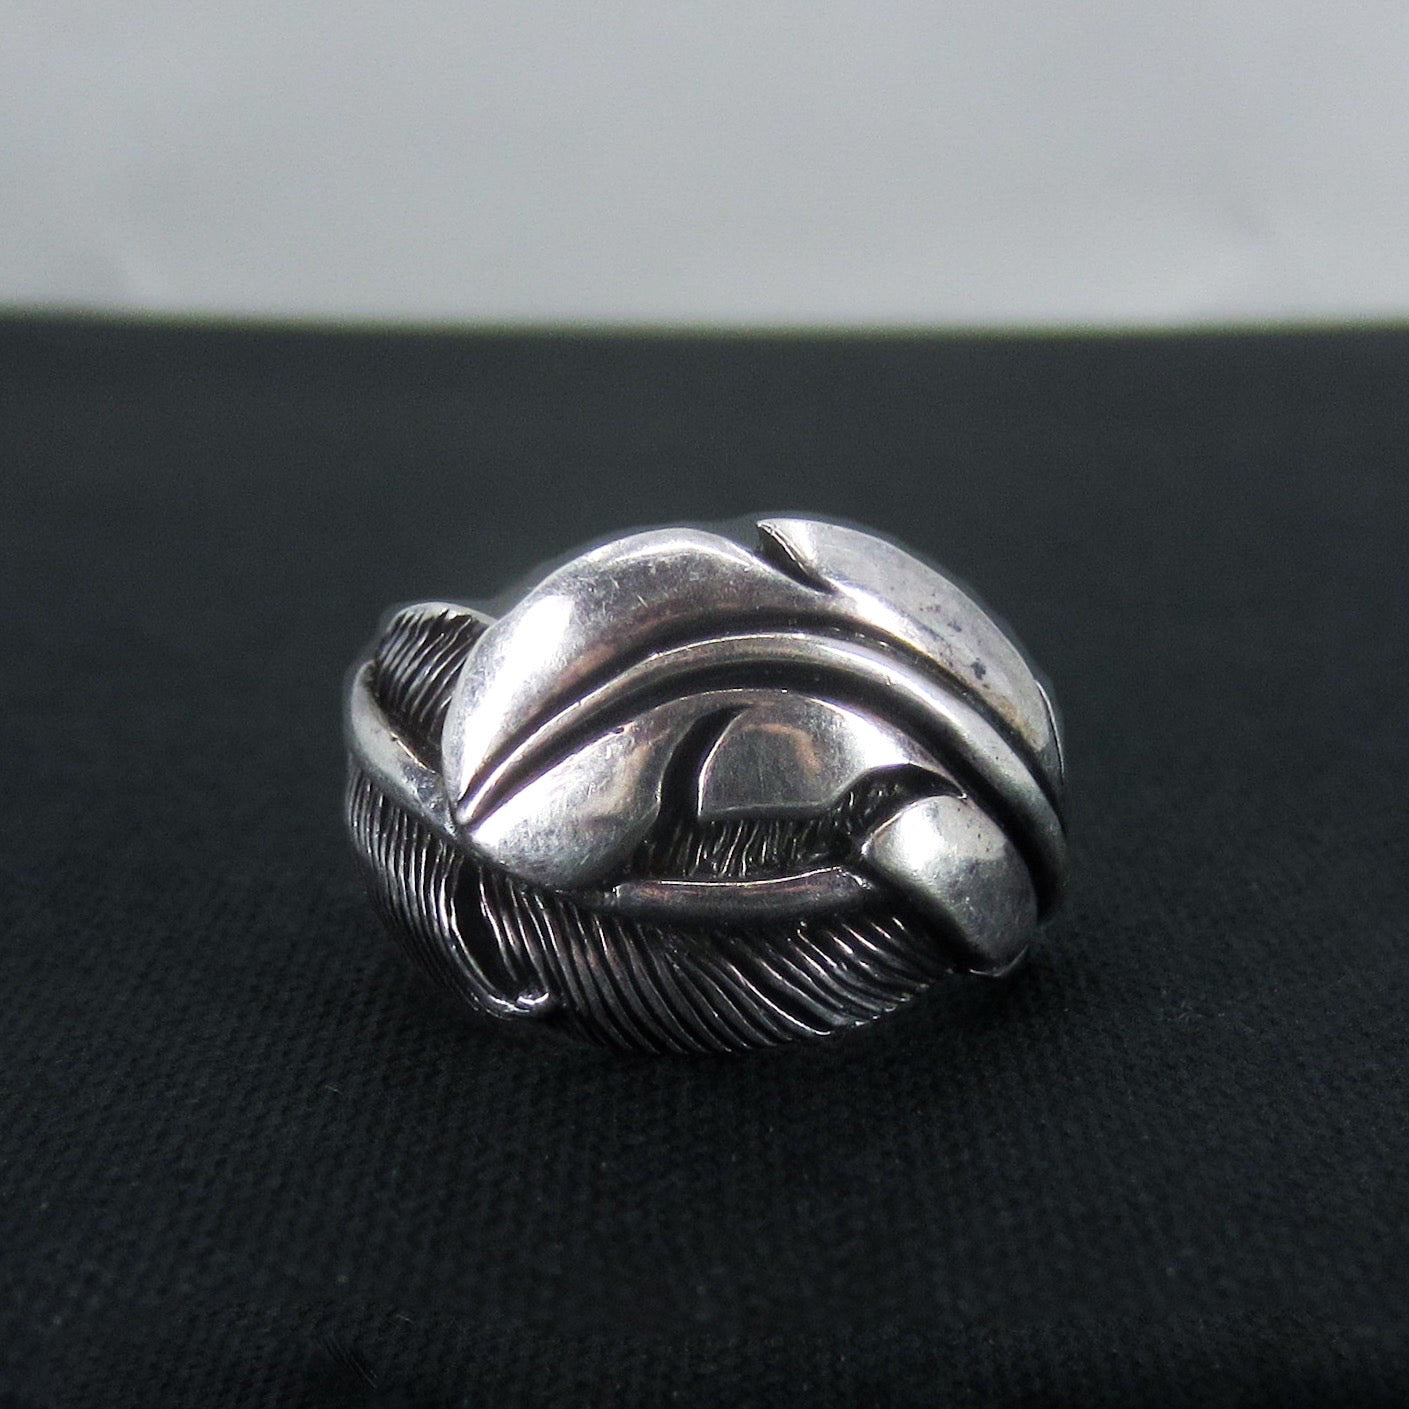 SOLD-Vintage Large Feather Ring Sterling Silver c. 1970